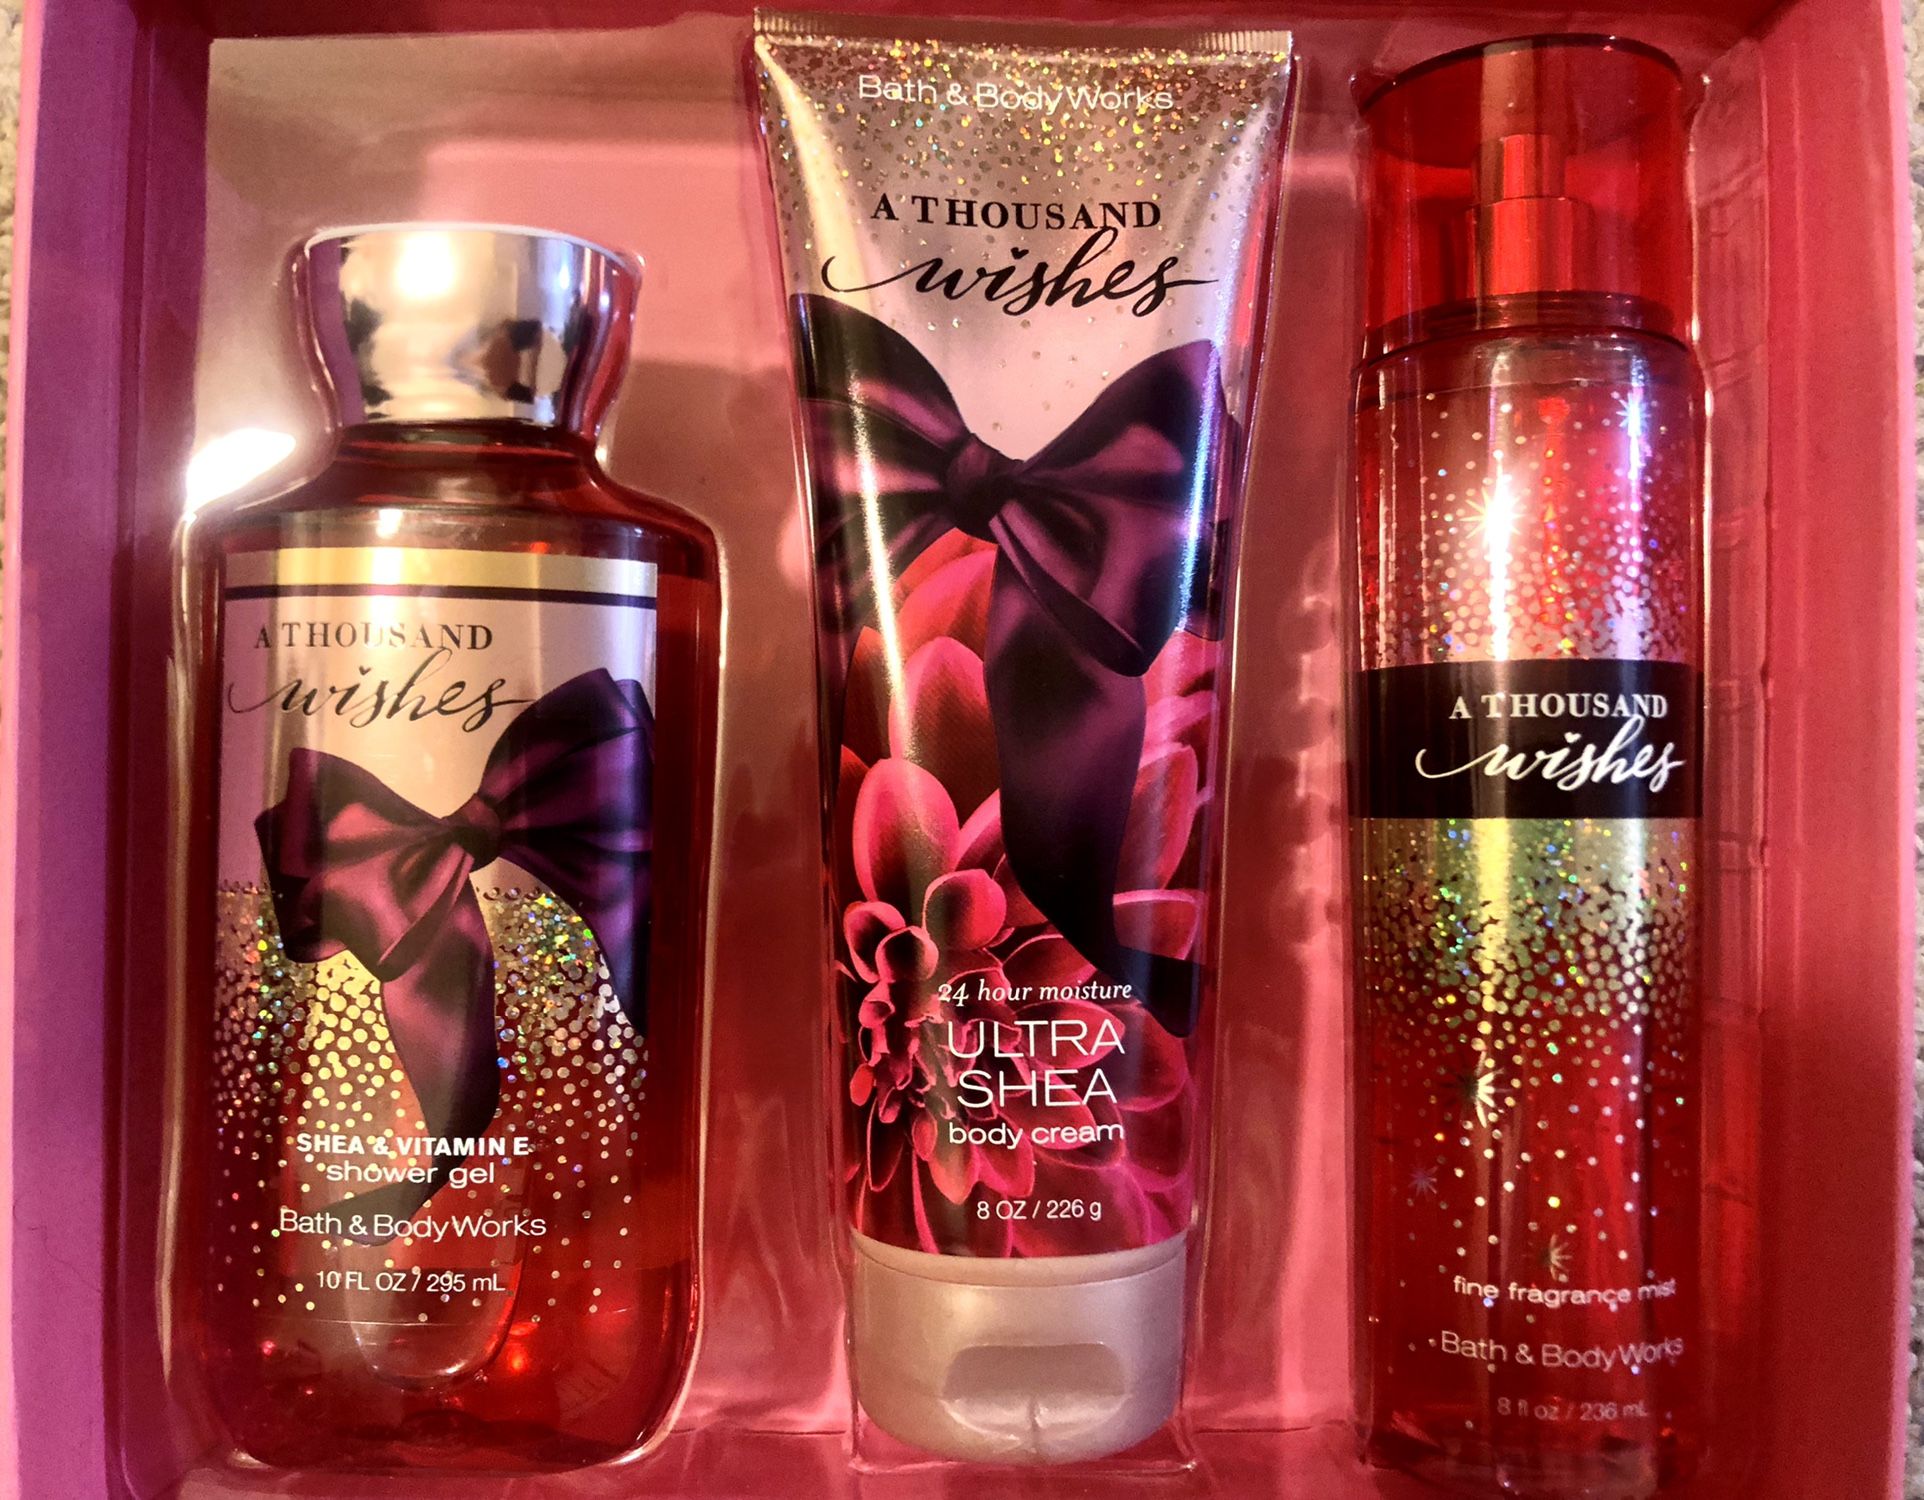 Bath and body works “A thousand wishes” Gift Set